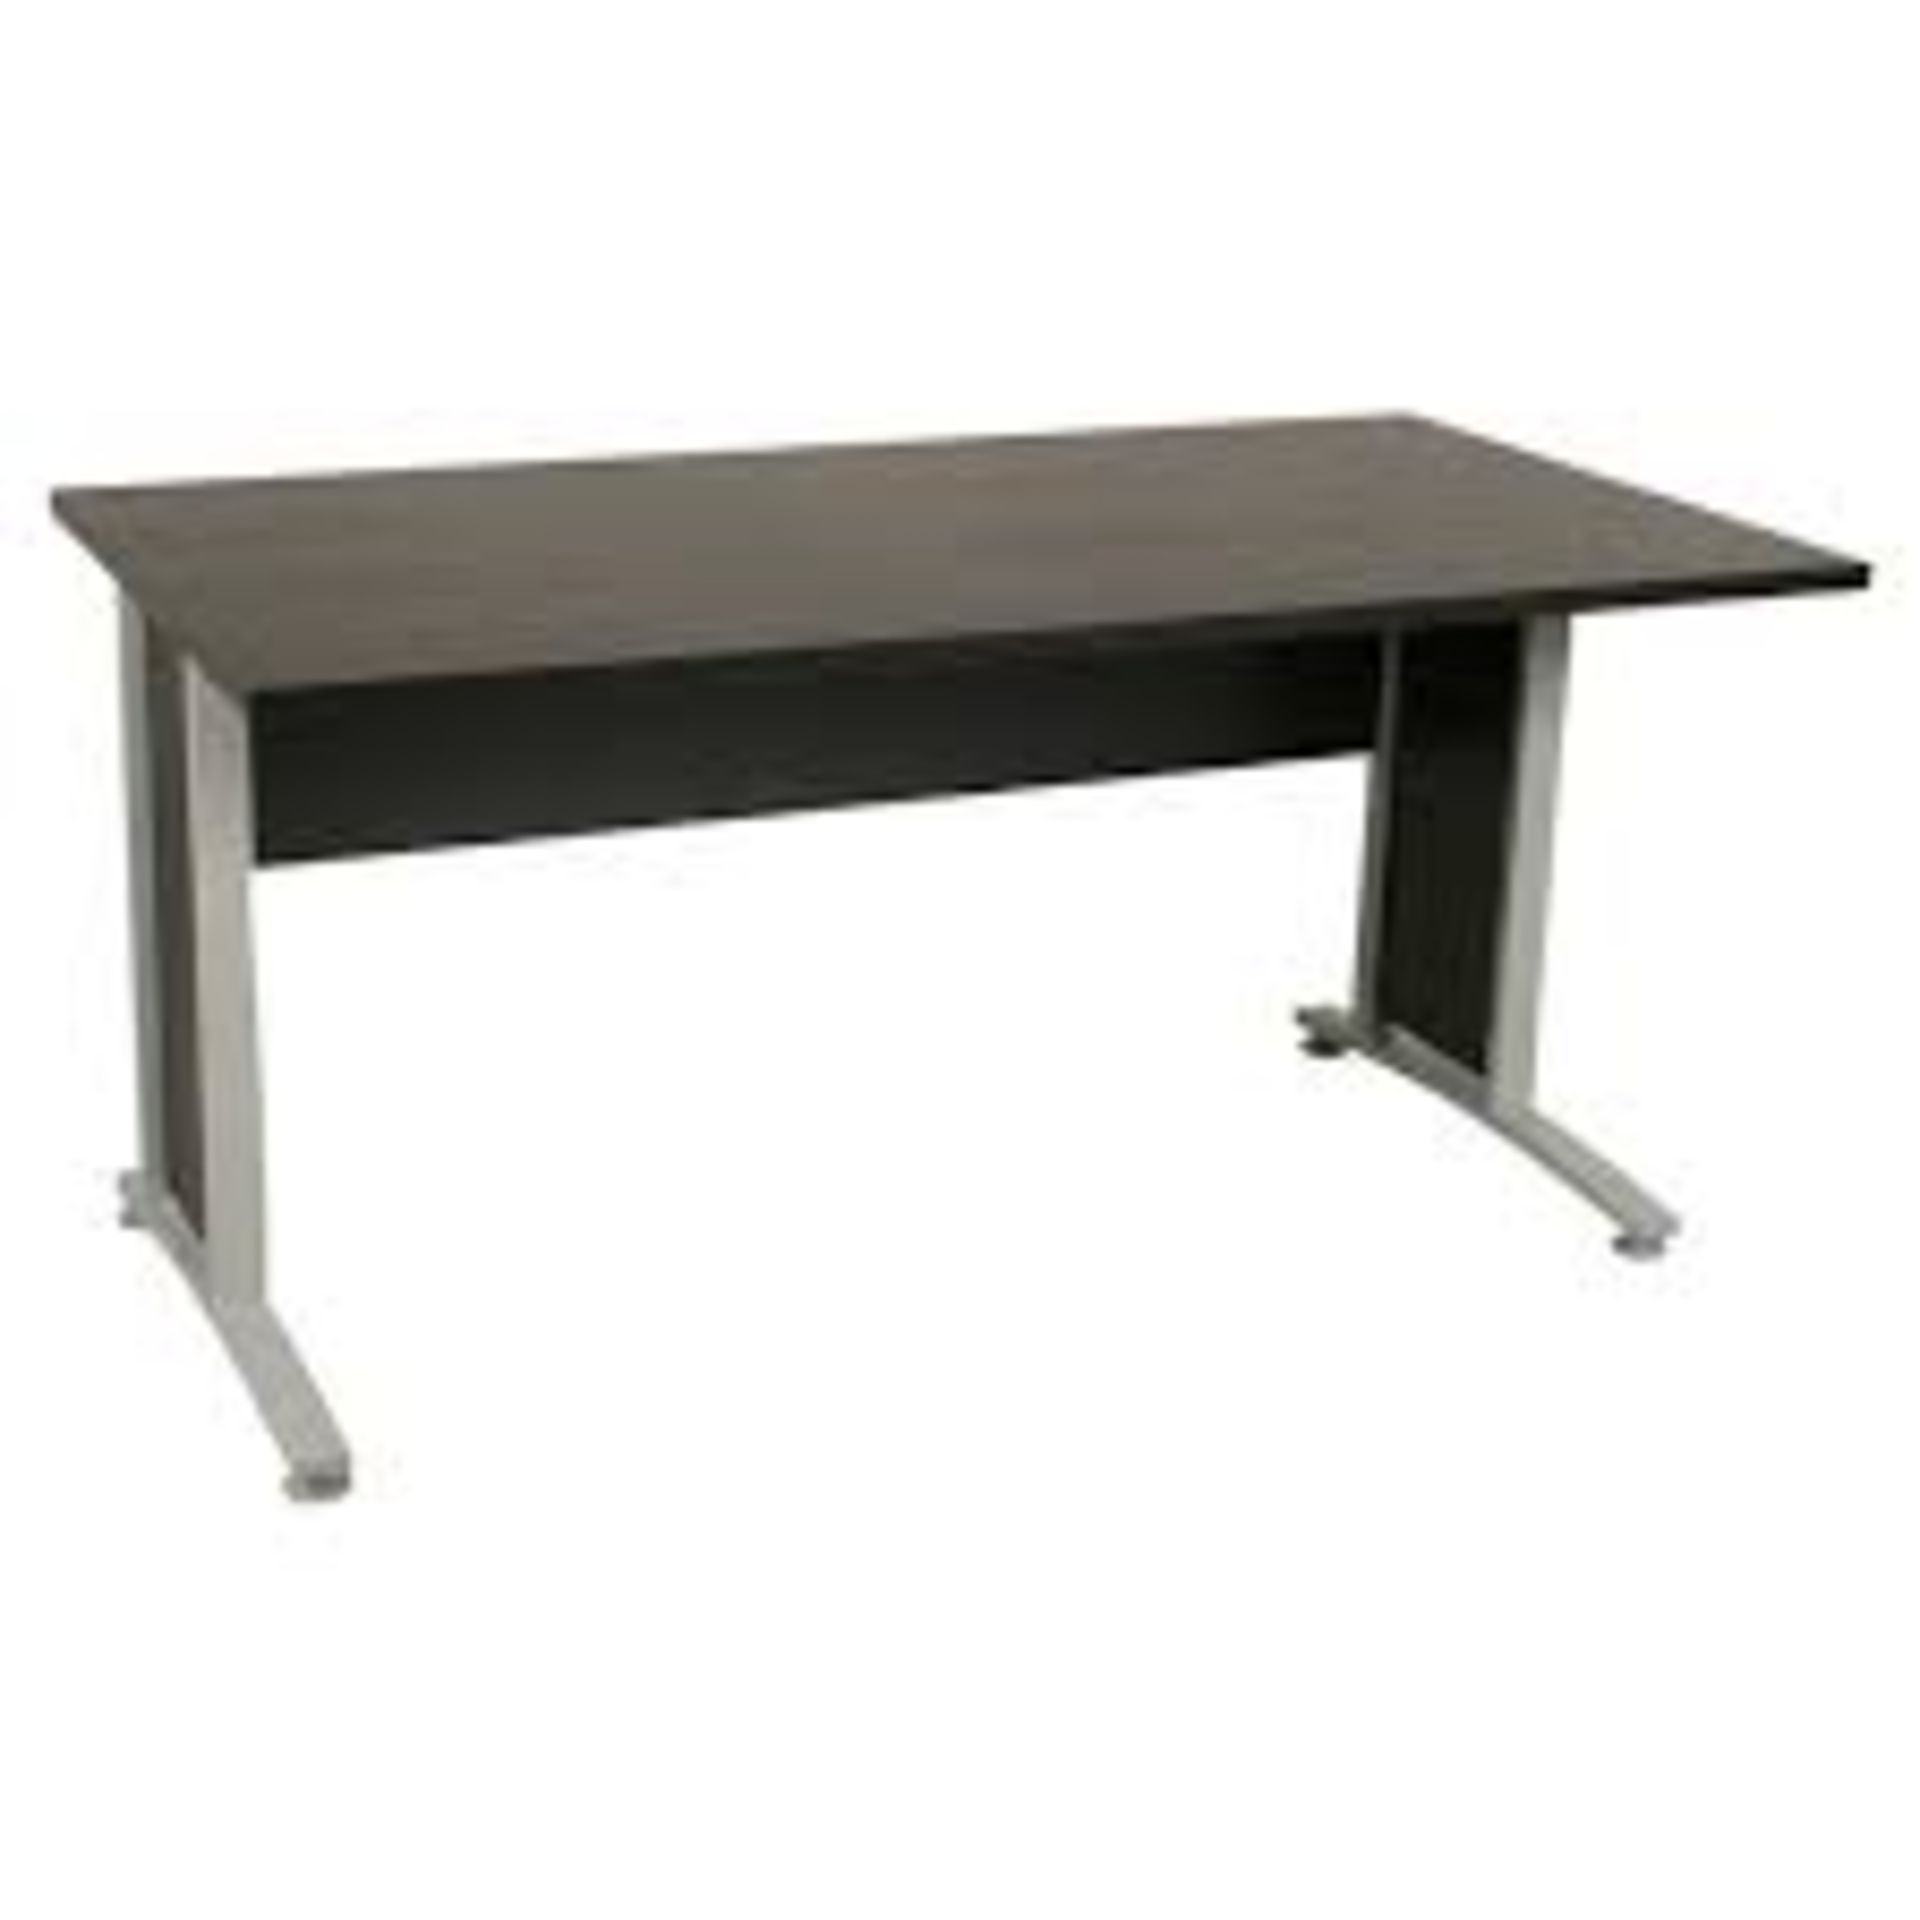 1 x 150CM ESTELLE DESK RRP £100 (25.01.18) (THIS ITEM IS FLAT PACKED/VIEWING IS RECOMMENDED/